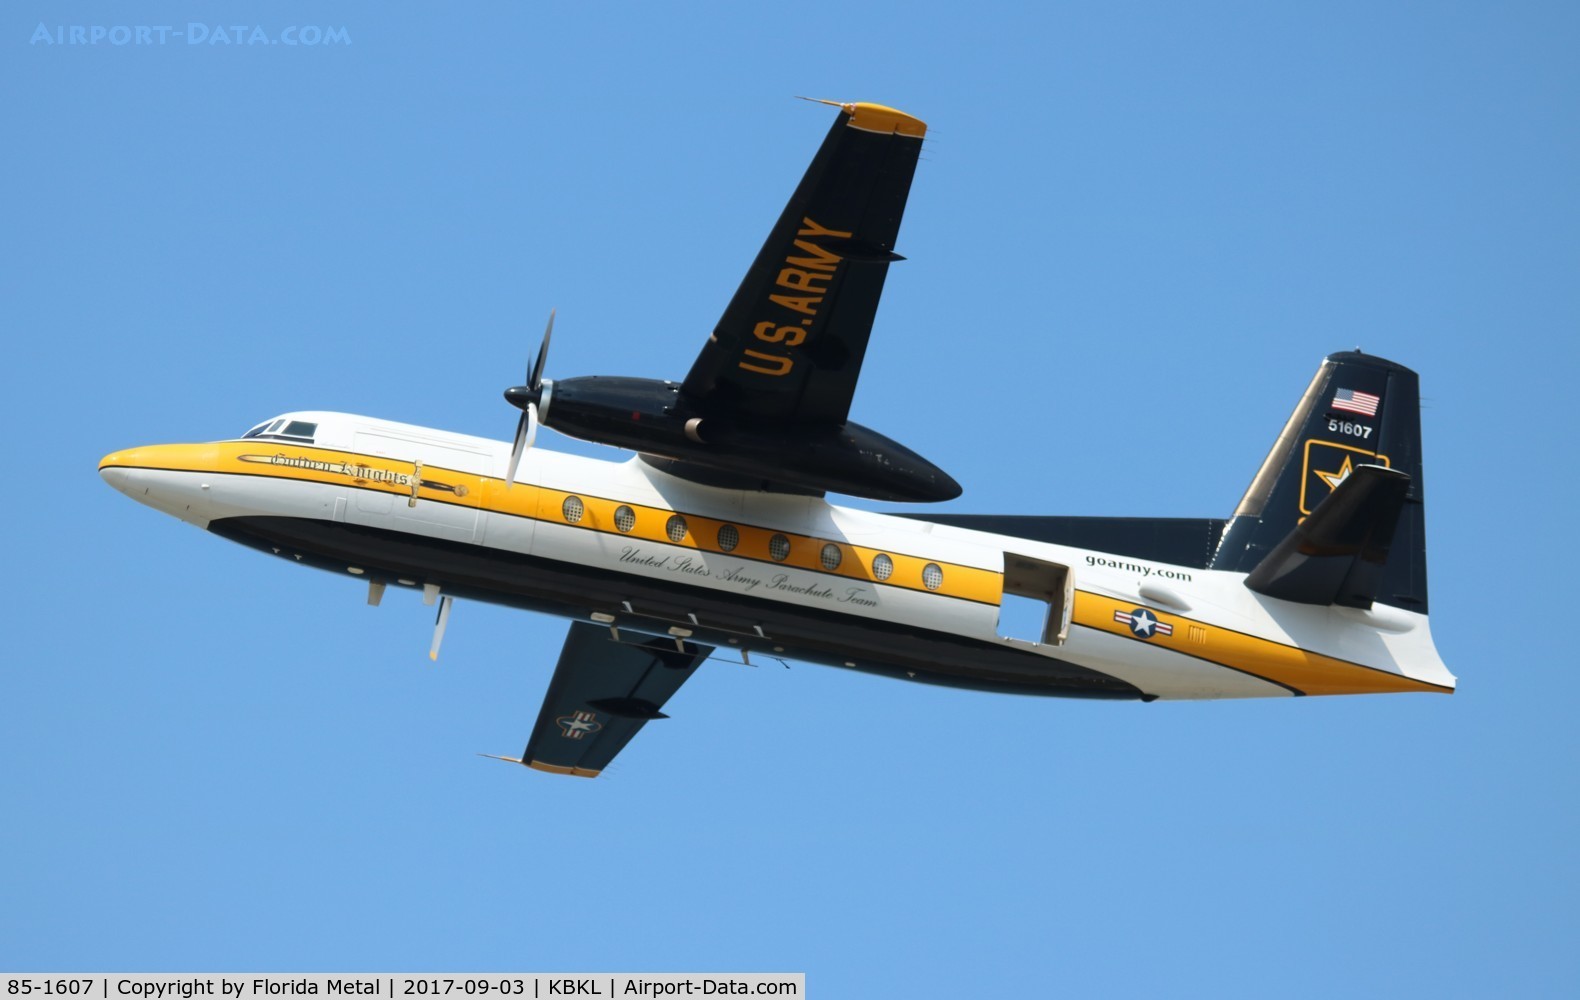 85-1607, 1983 Fokker C-31A (F27-400M) Troopship C/N 10653, C-31A Golden Knights